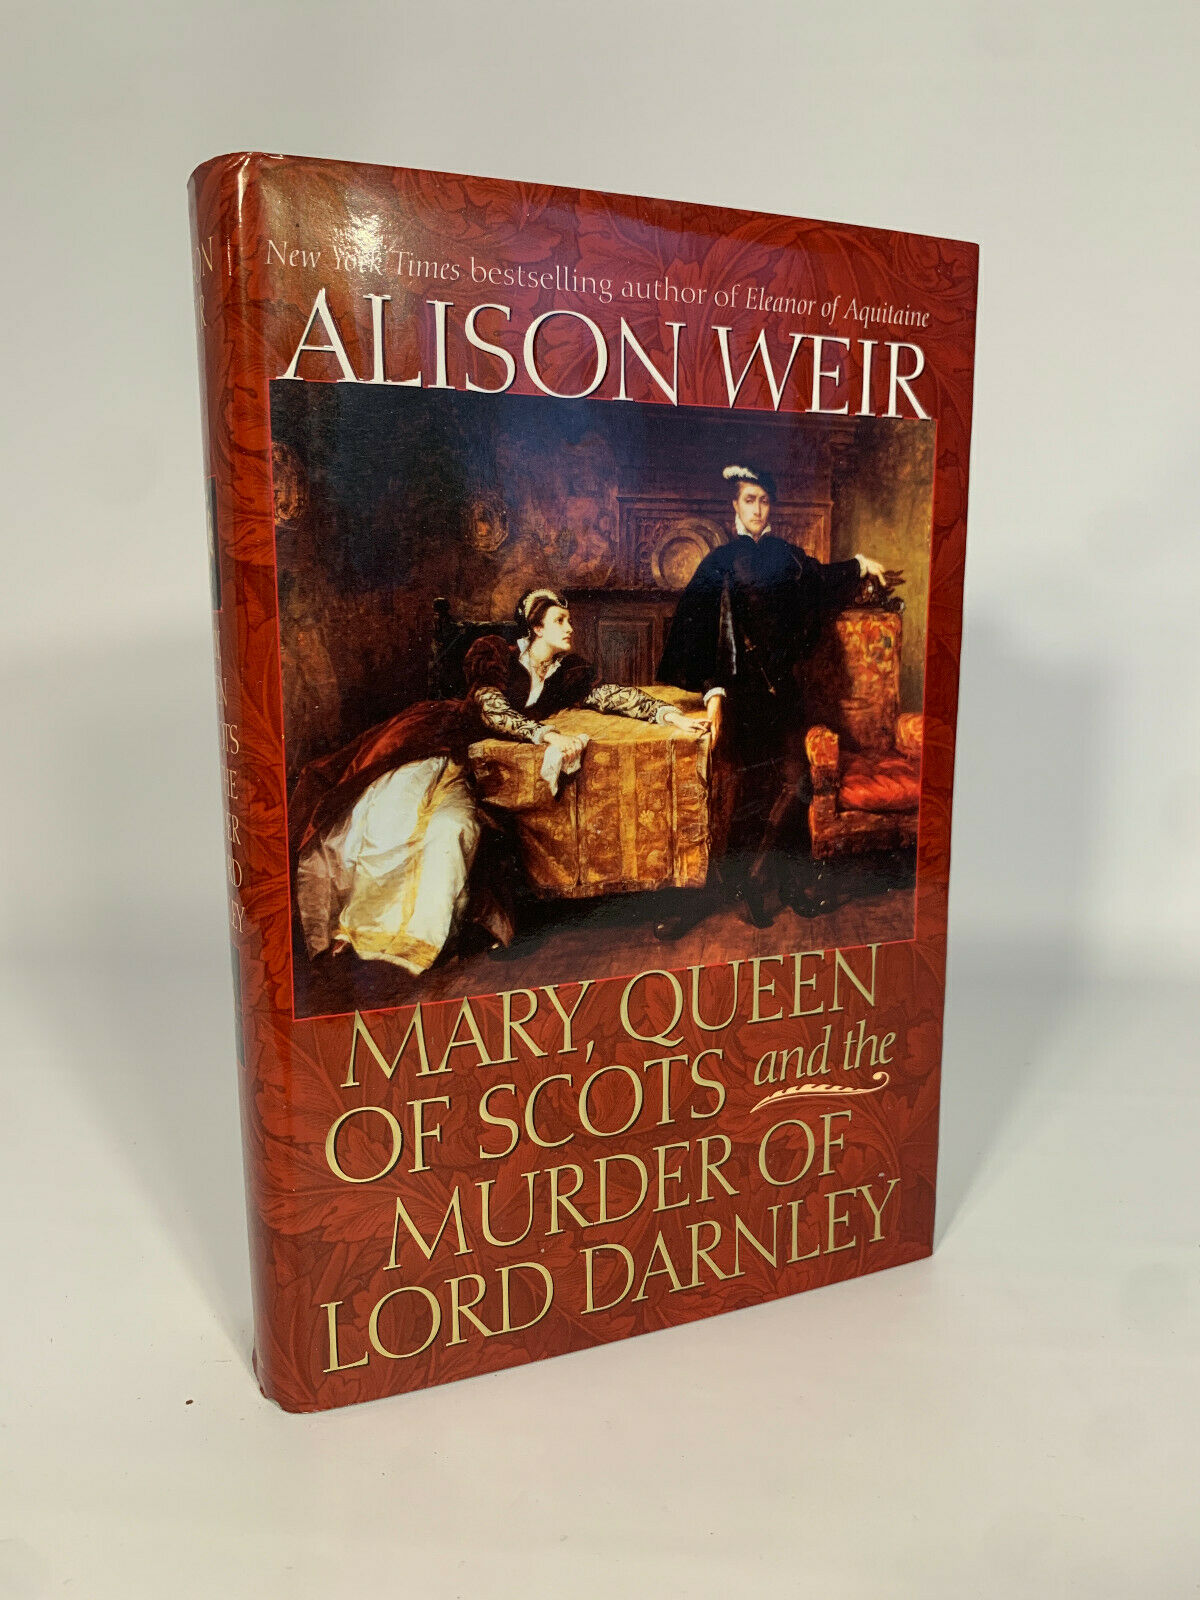 Mary, Queen of Scots and the Murder of Lord Darnley by Alison Weir, Hardcover